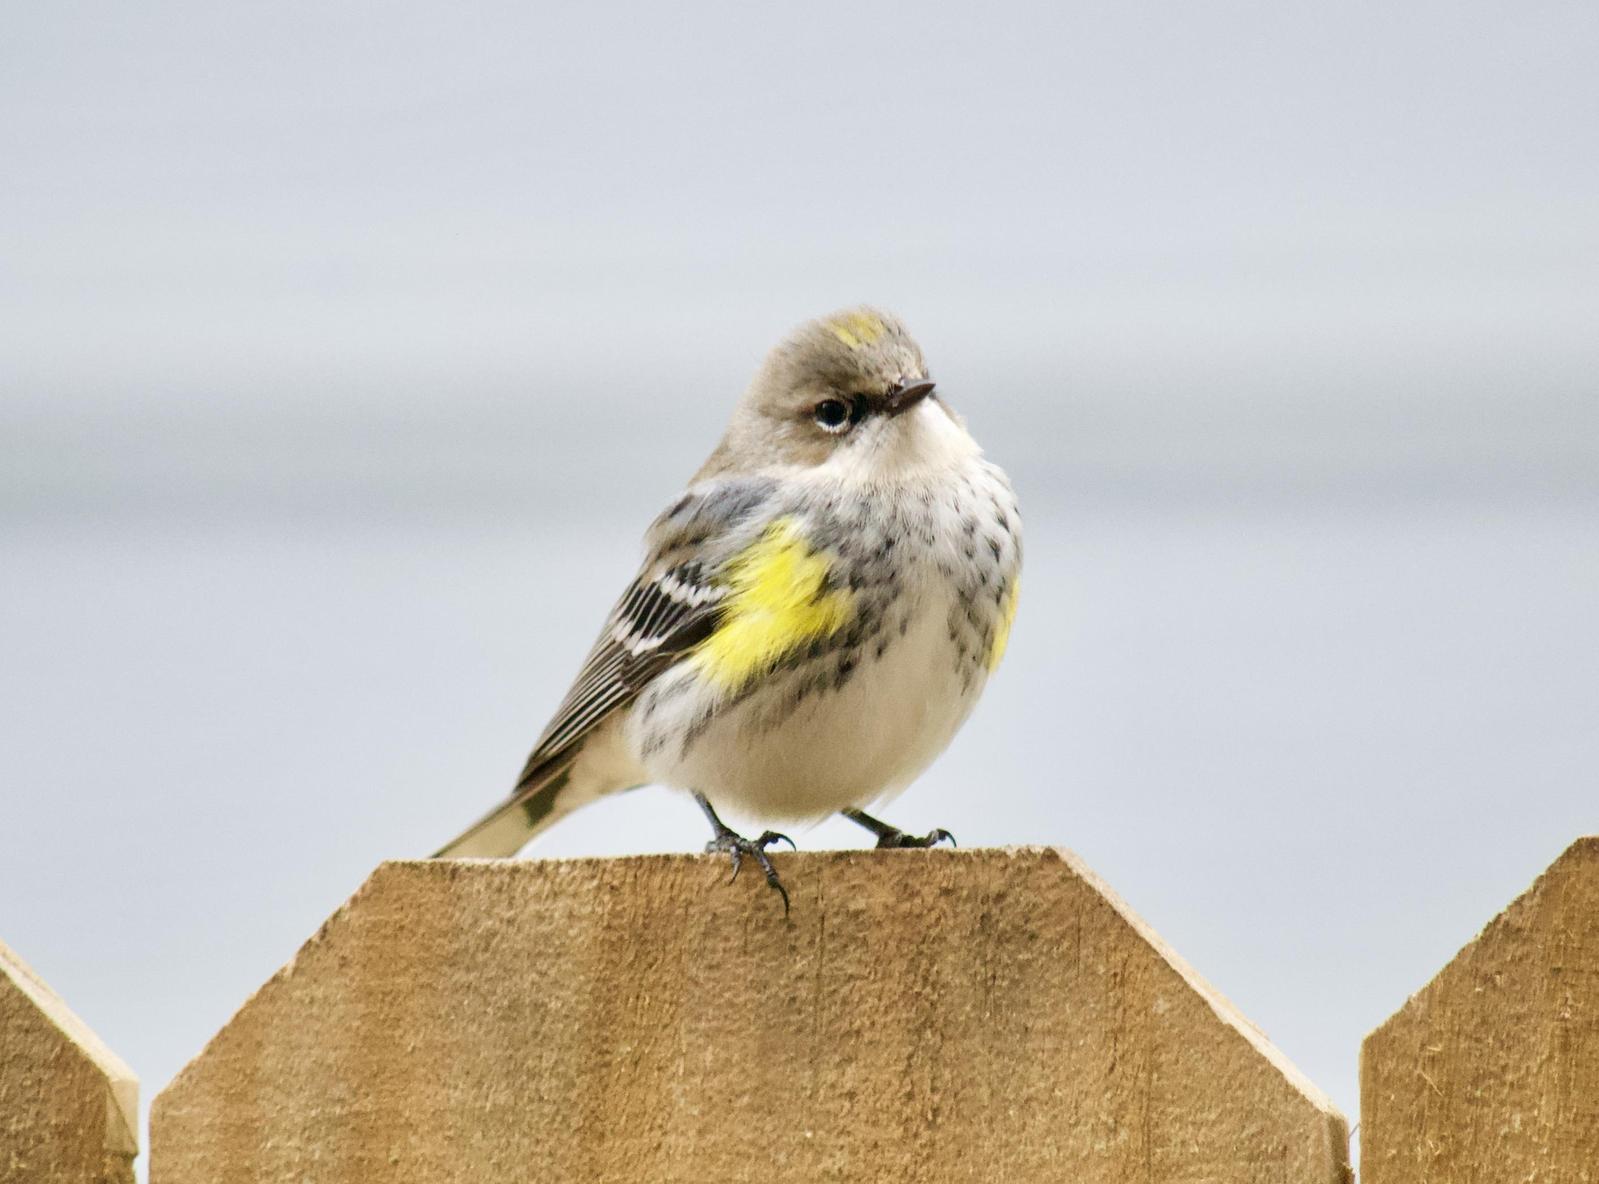 Yellow-rumped Warbler Photo by Gena Traylor